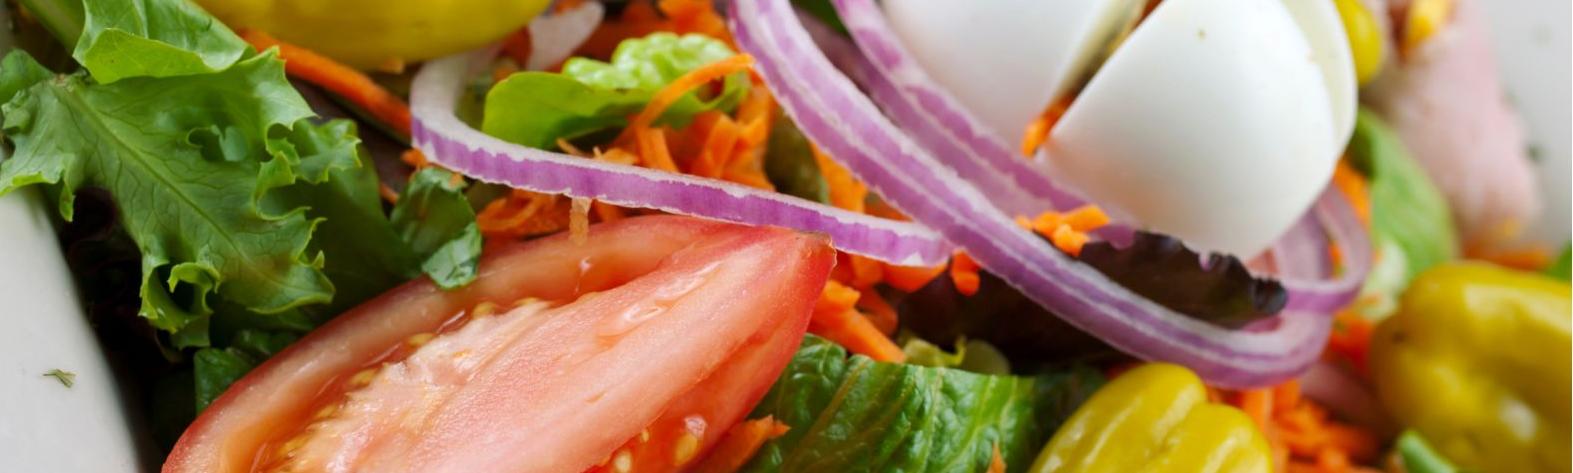 Close up of salad with lettuce, peppers, red onion, boiled egg and shredded carrot